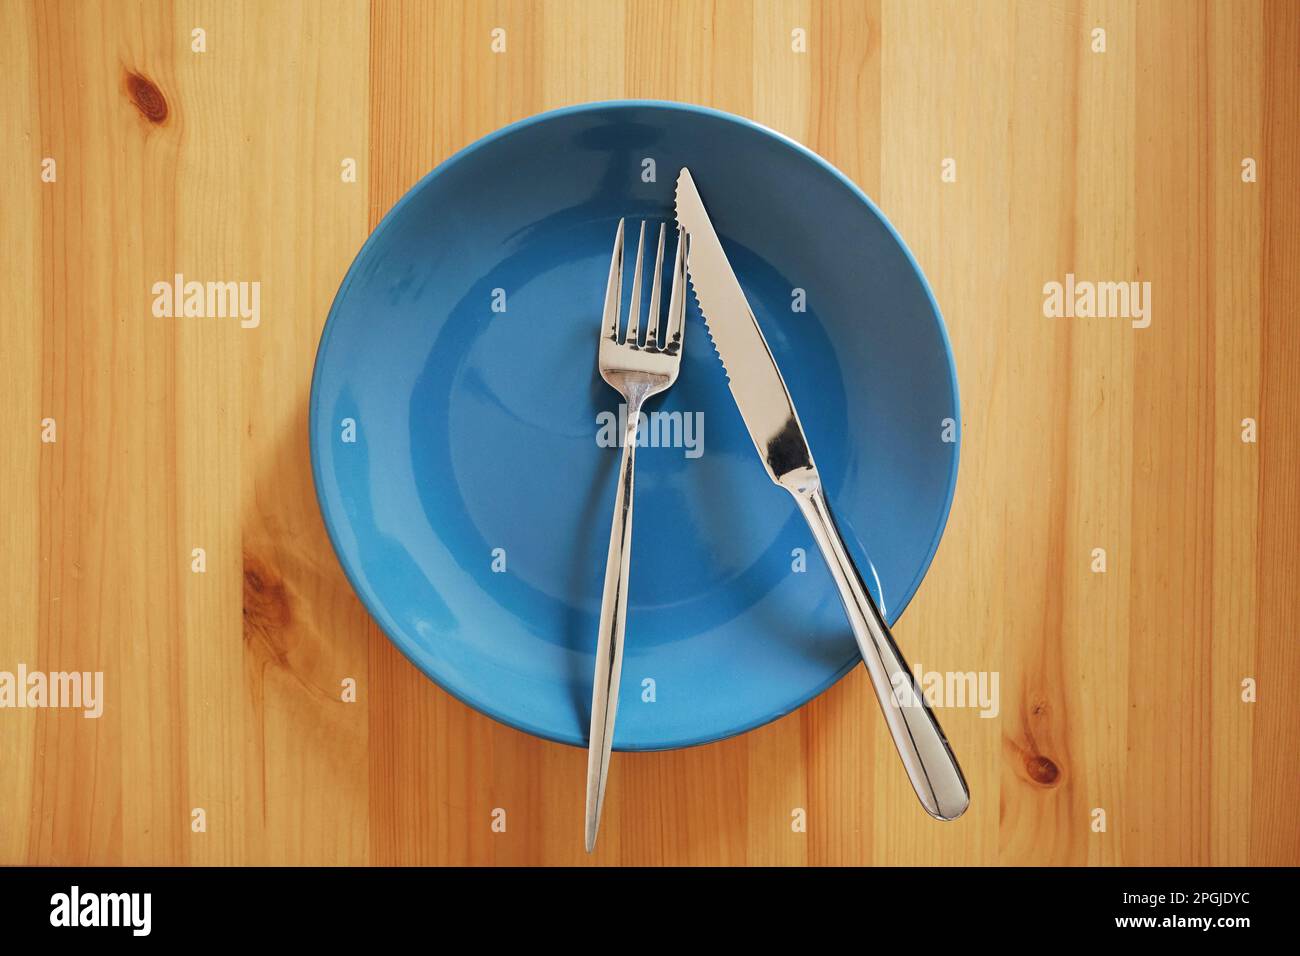 Empty and clean blue plate with fork and knife on a wooden table Stock Photo